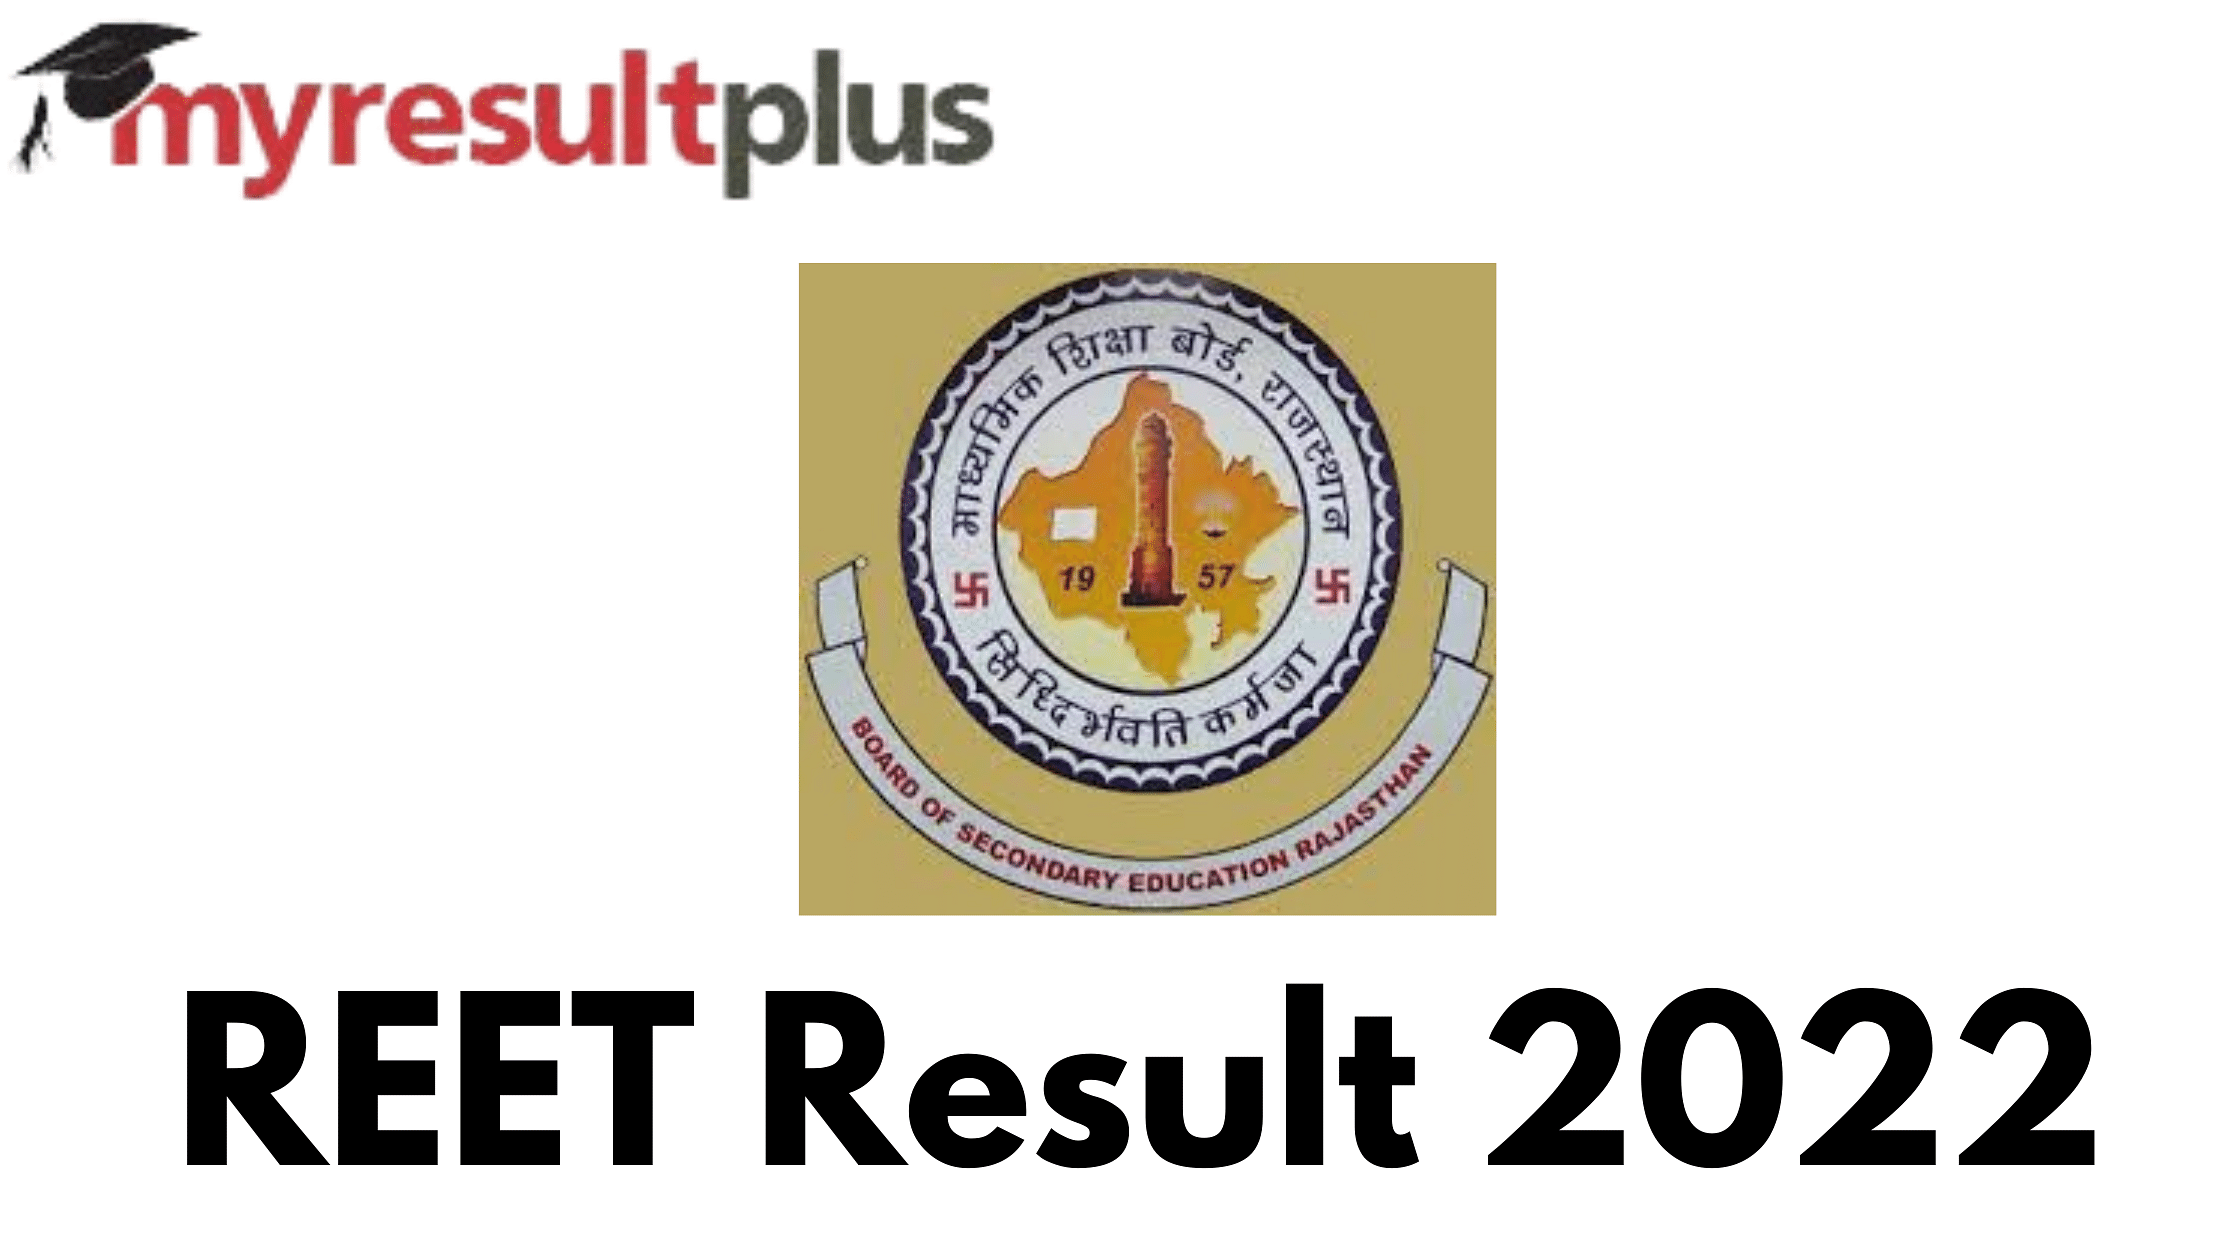 REET Result 2022 to be Announced Soon, Know How to Check Here